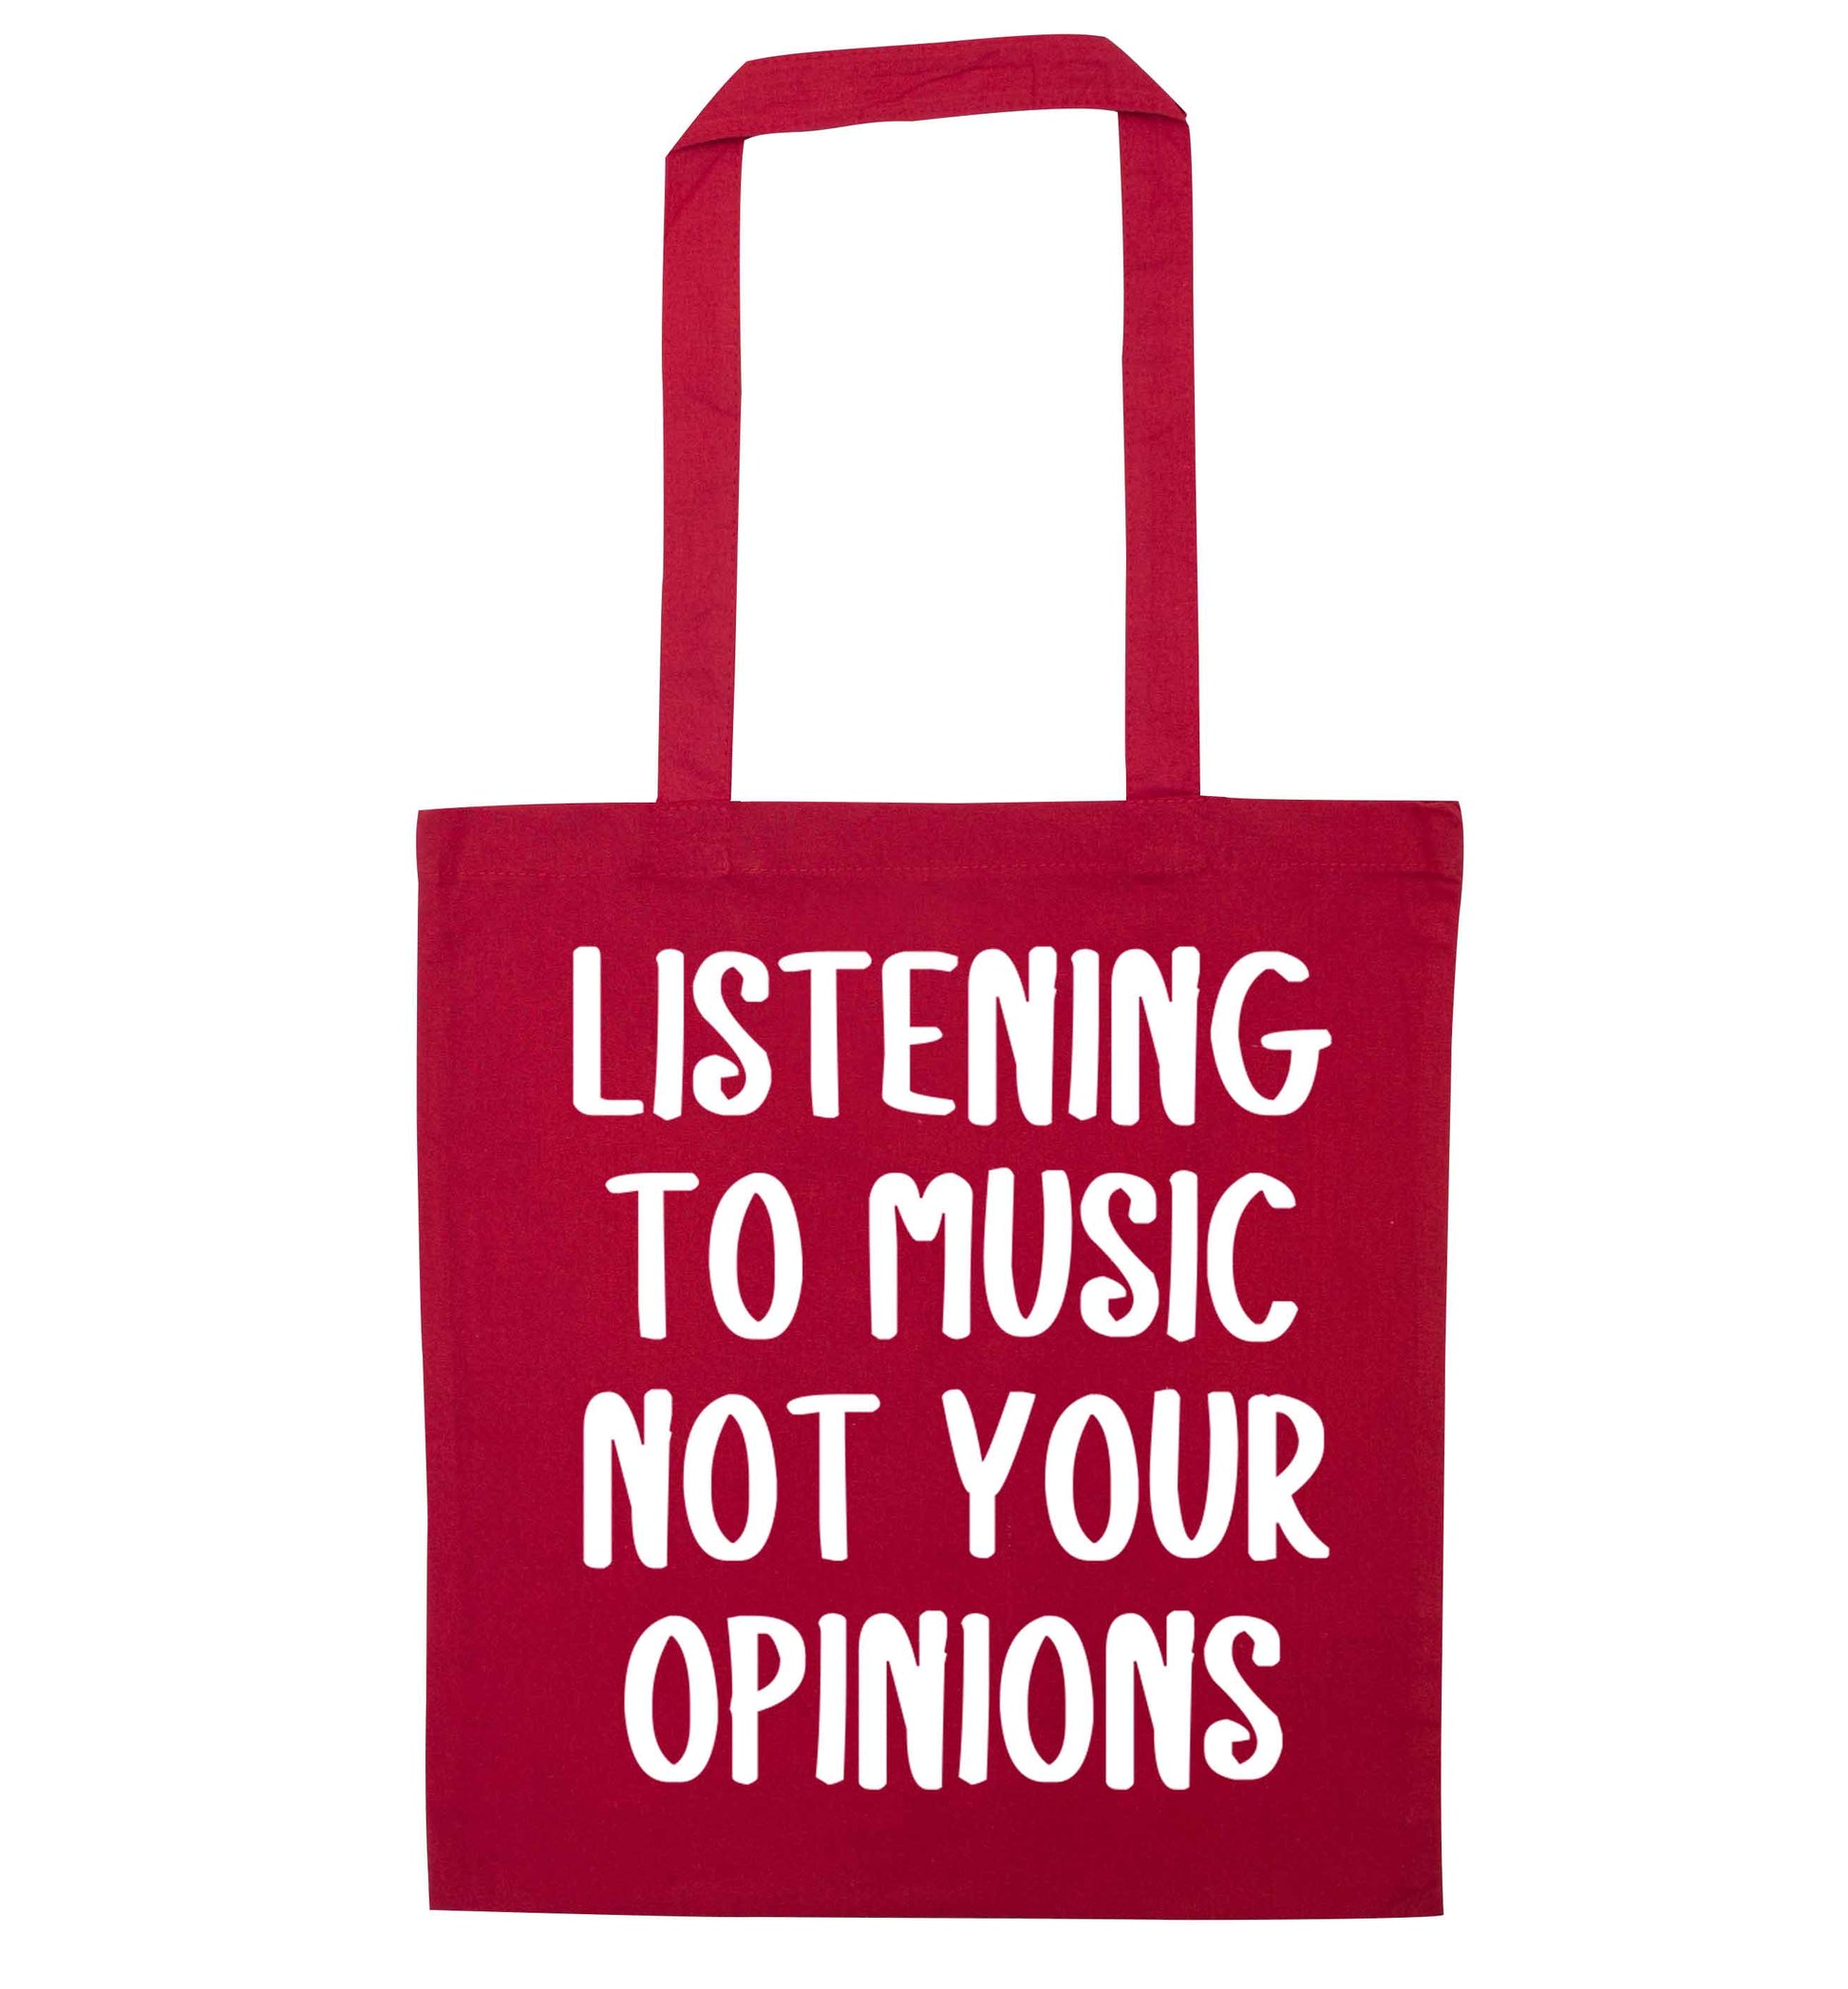 Listening to music not your opinions red tote bag